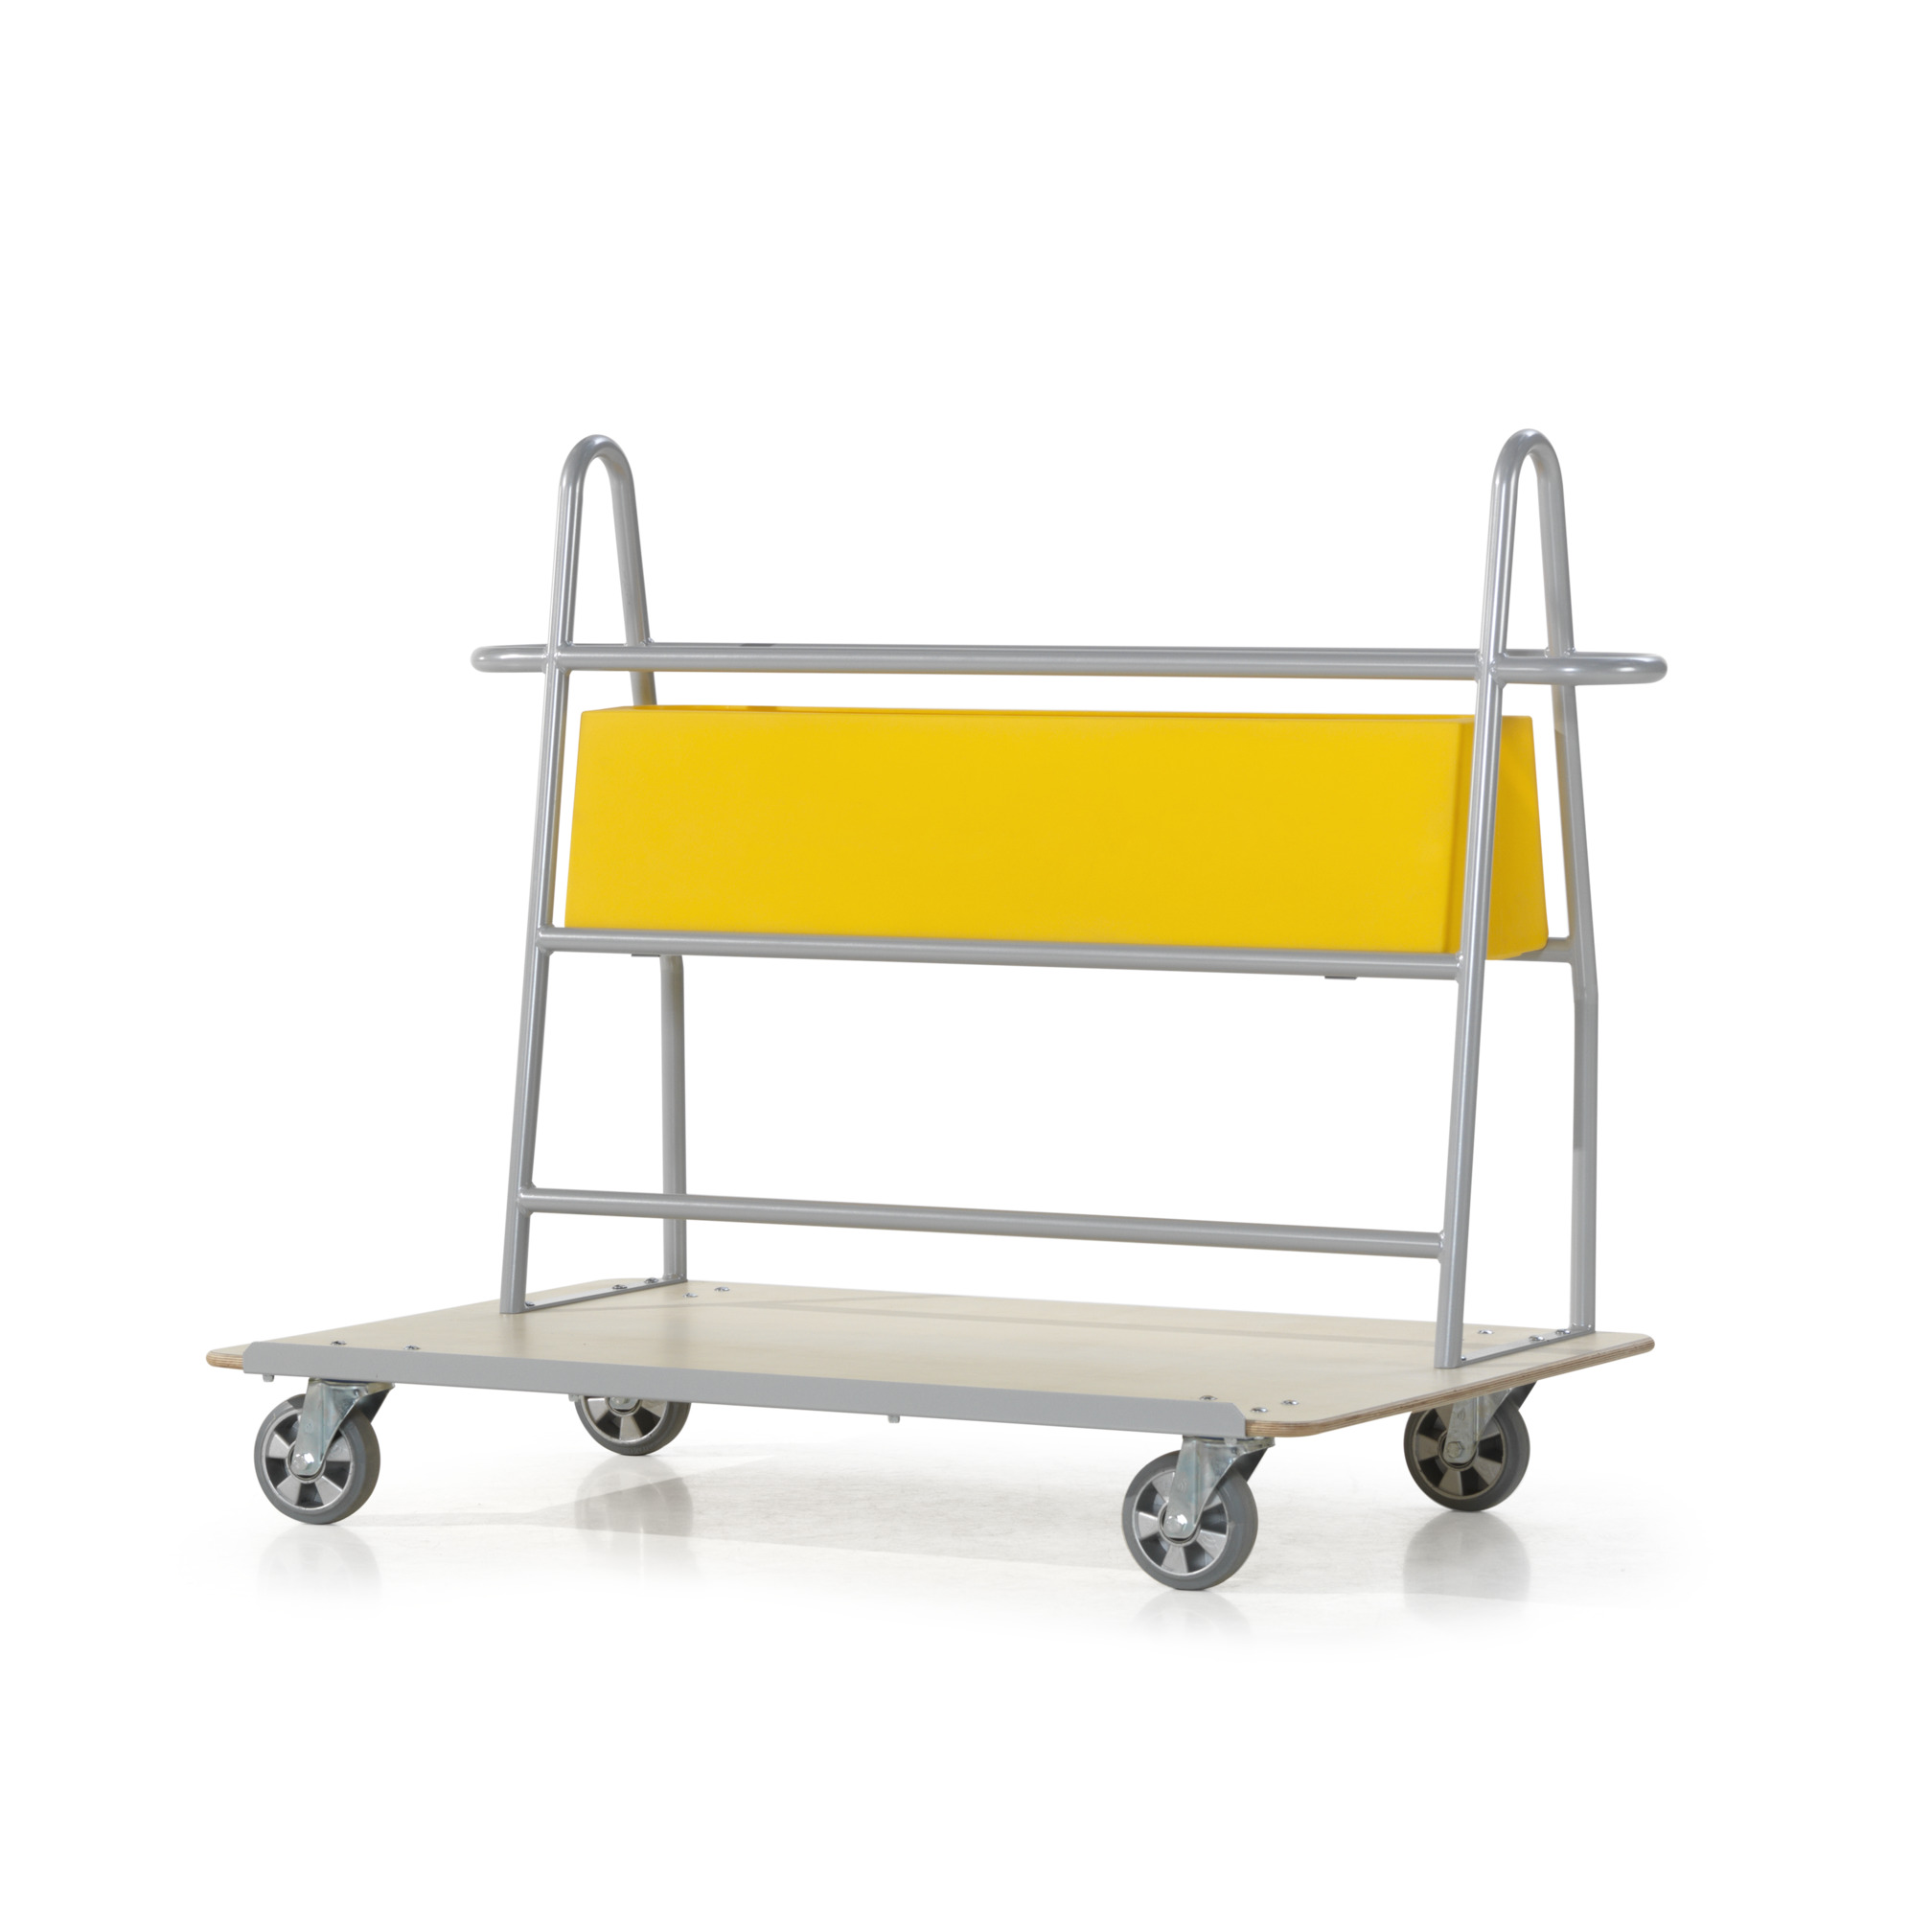 Vertical mat trolley with extra storage space